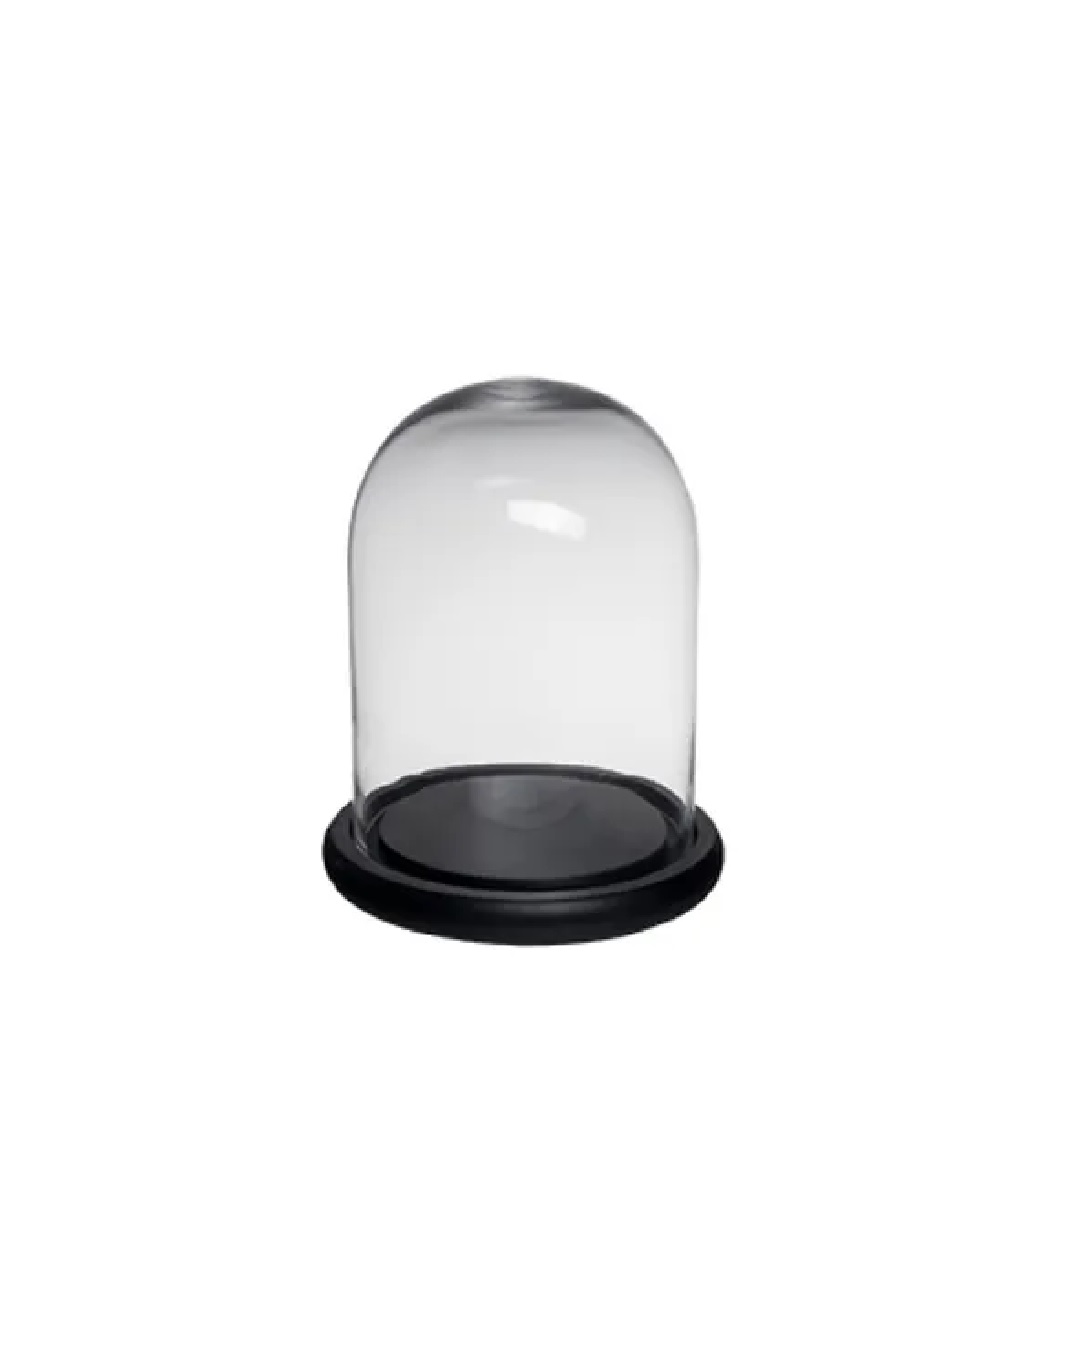 Small dome with black base